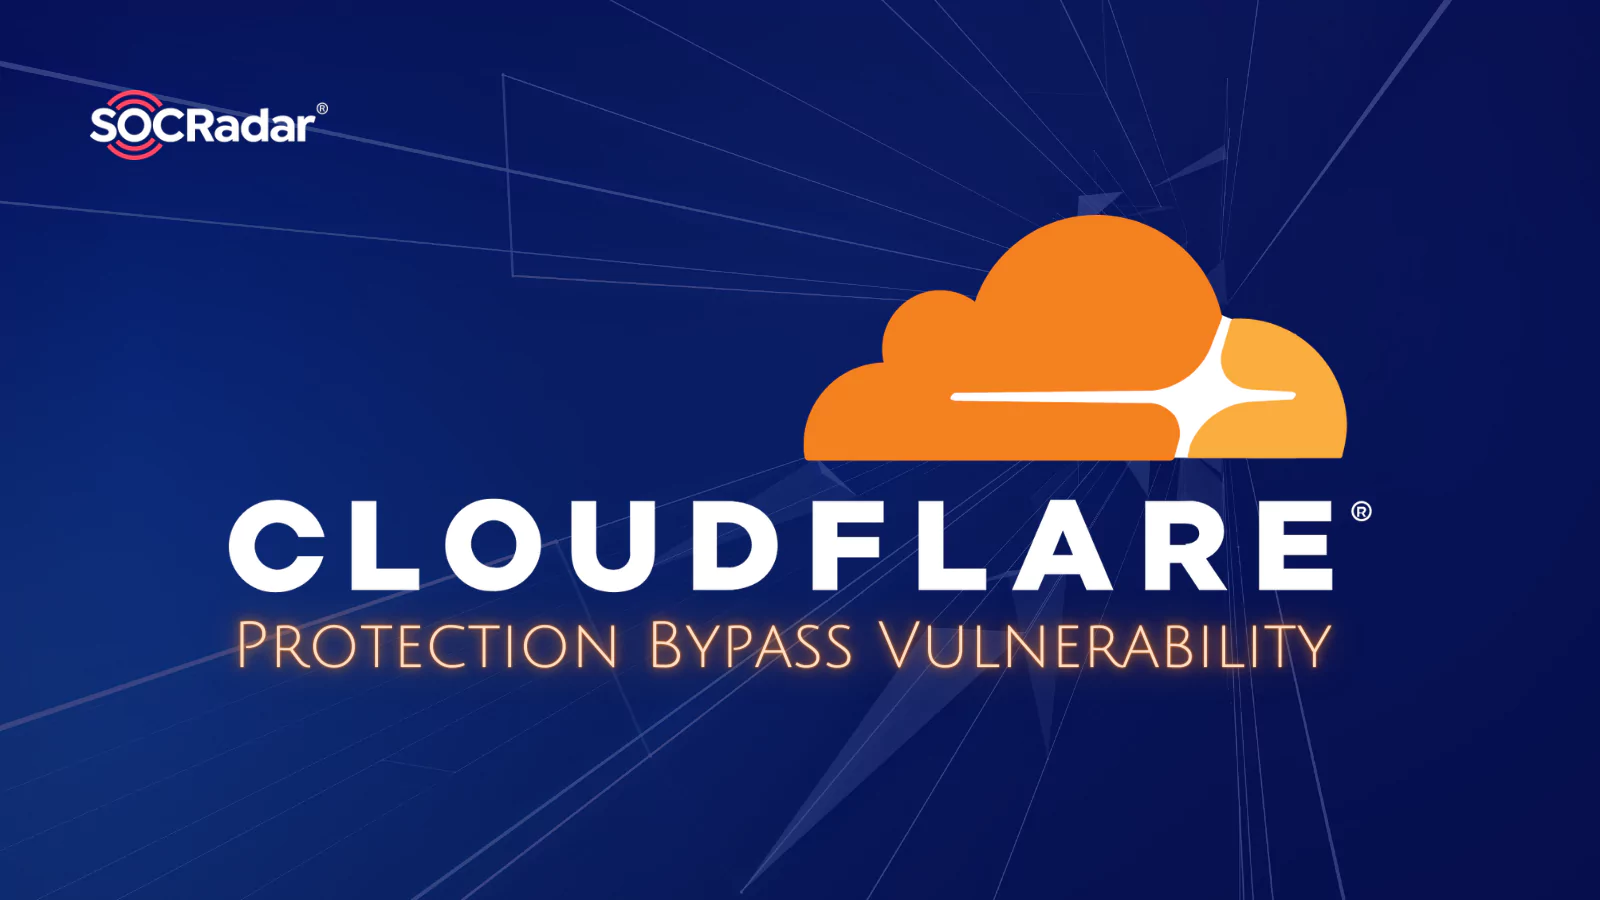 SOCRadar® Cyber Intelligence Inc. | Cloudflare Protection Bypass Vulnerability on Threat Actors’ Radar